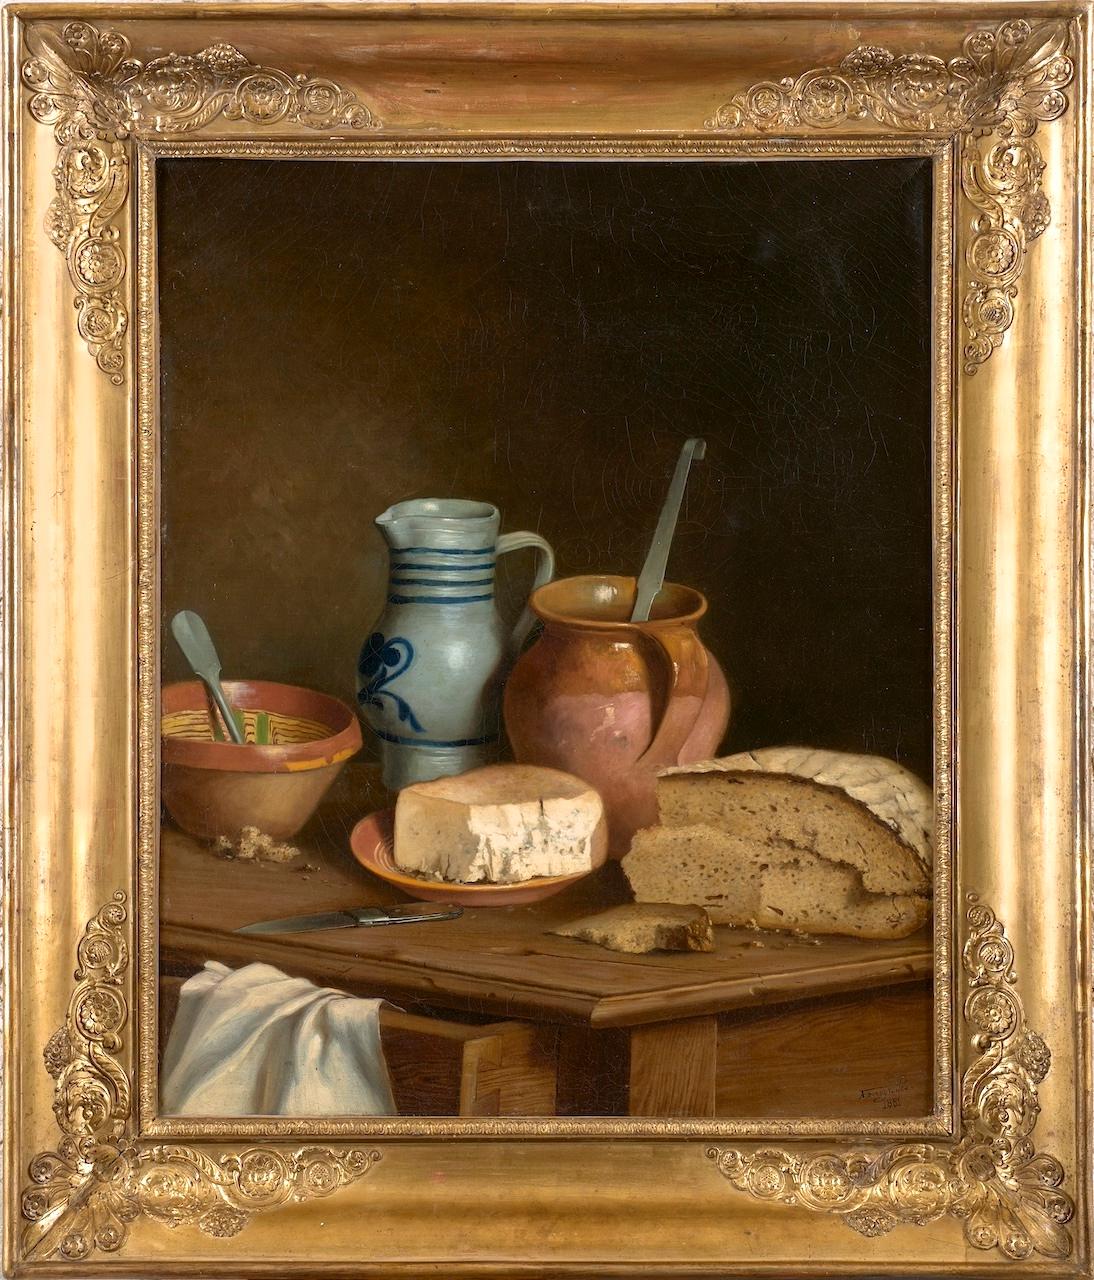 A. FERREYROLLES Still-Life Painting - Bread, fourme de Rochefort-Montagne and pottery on a wooden table